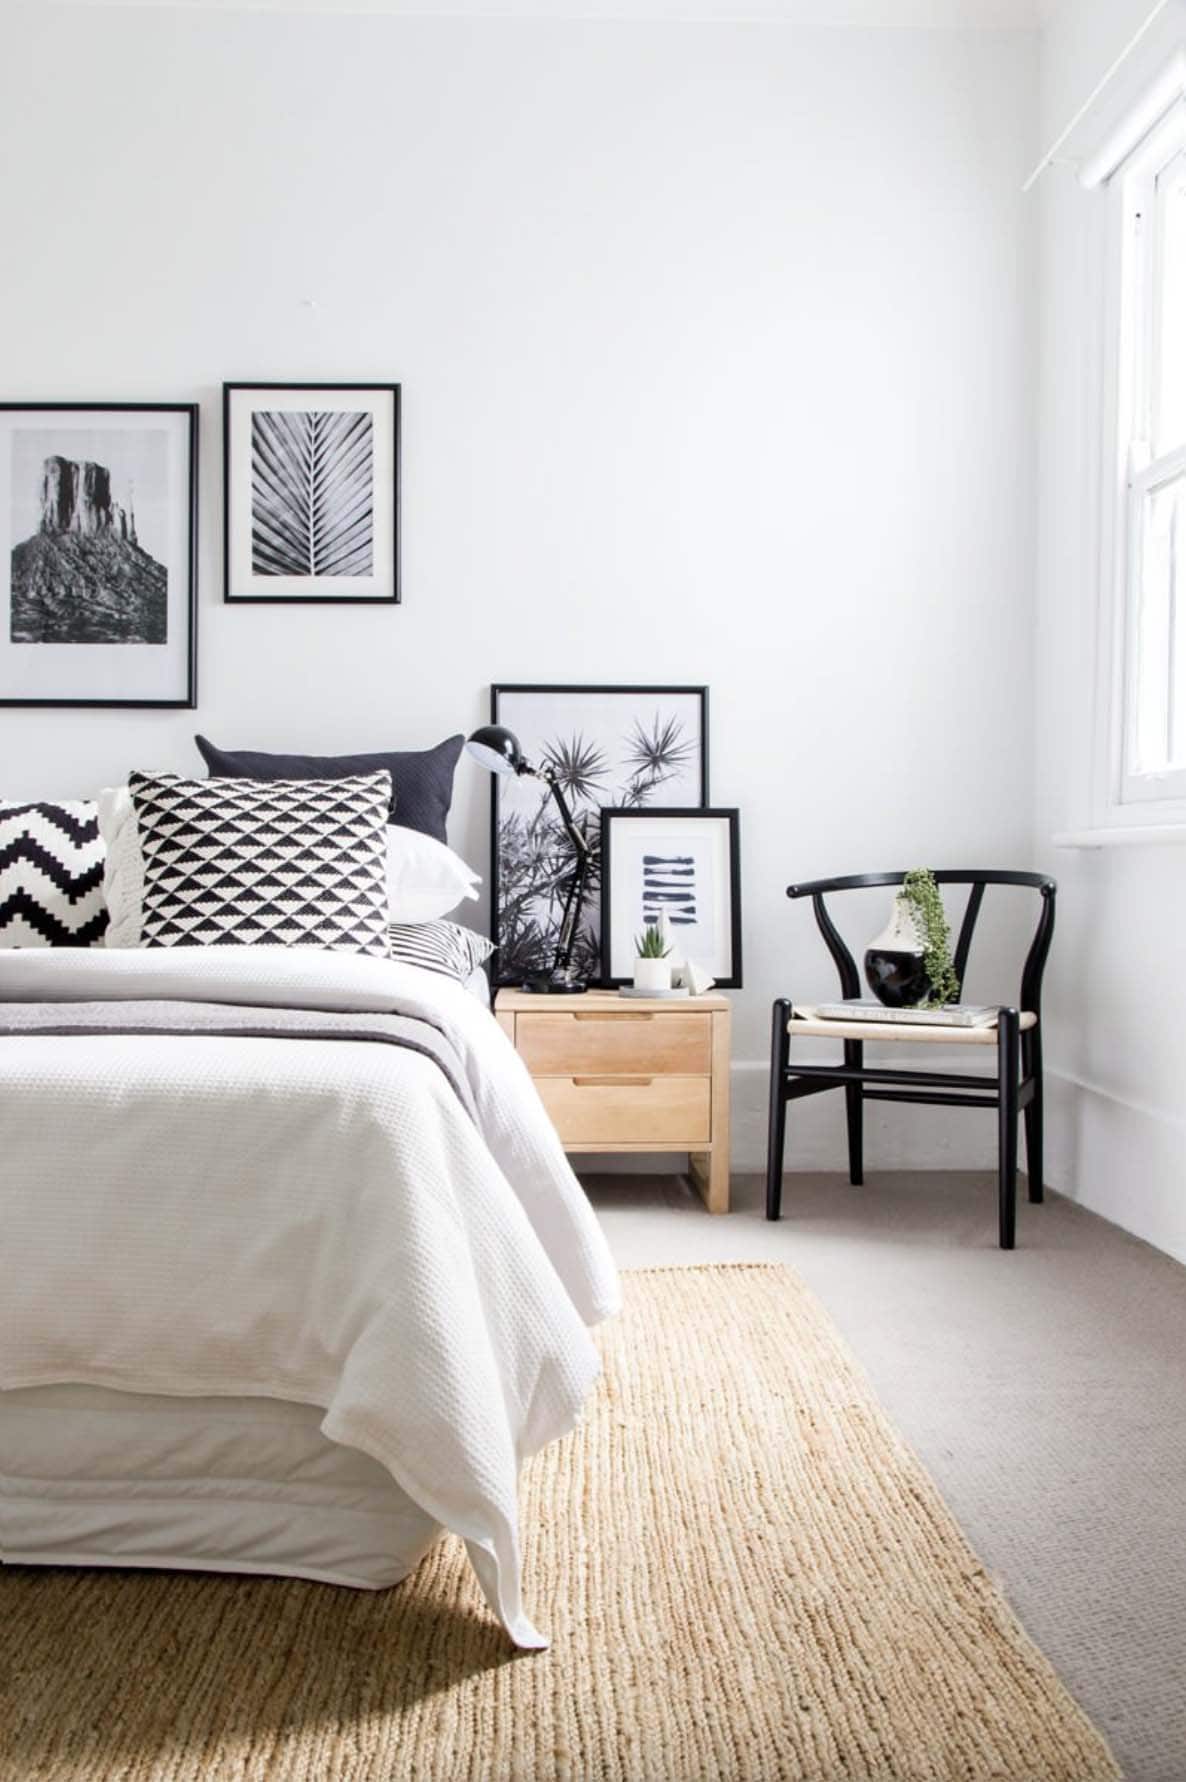 Scandinavian bedroom with a black and white color palette